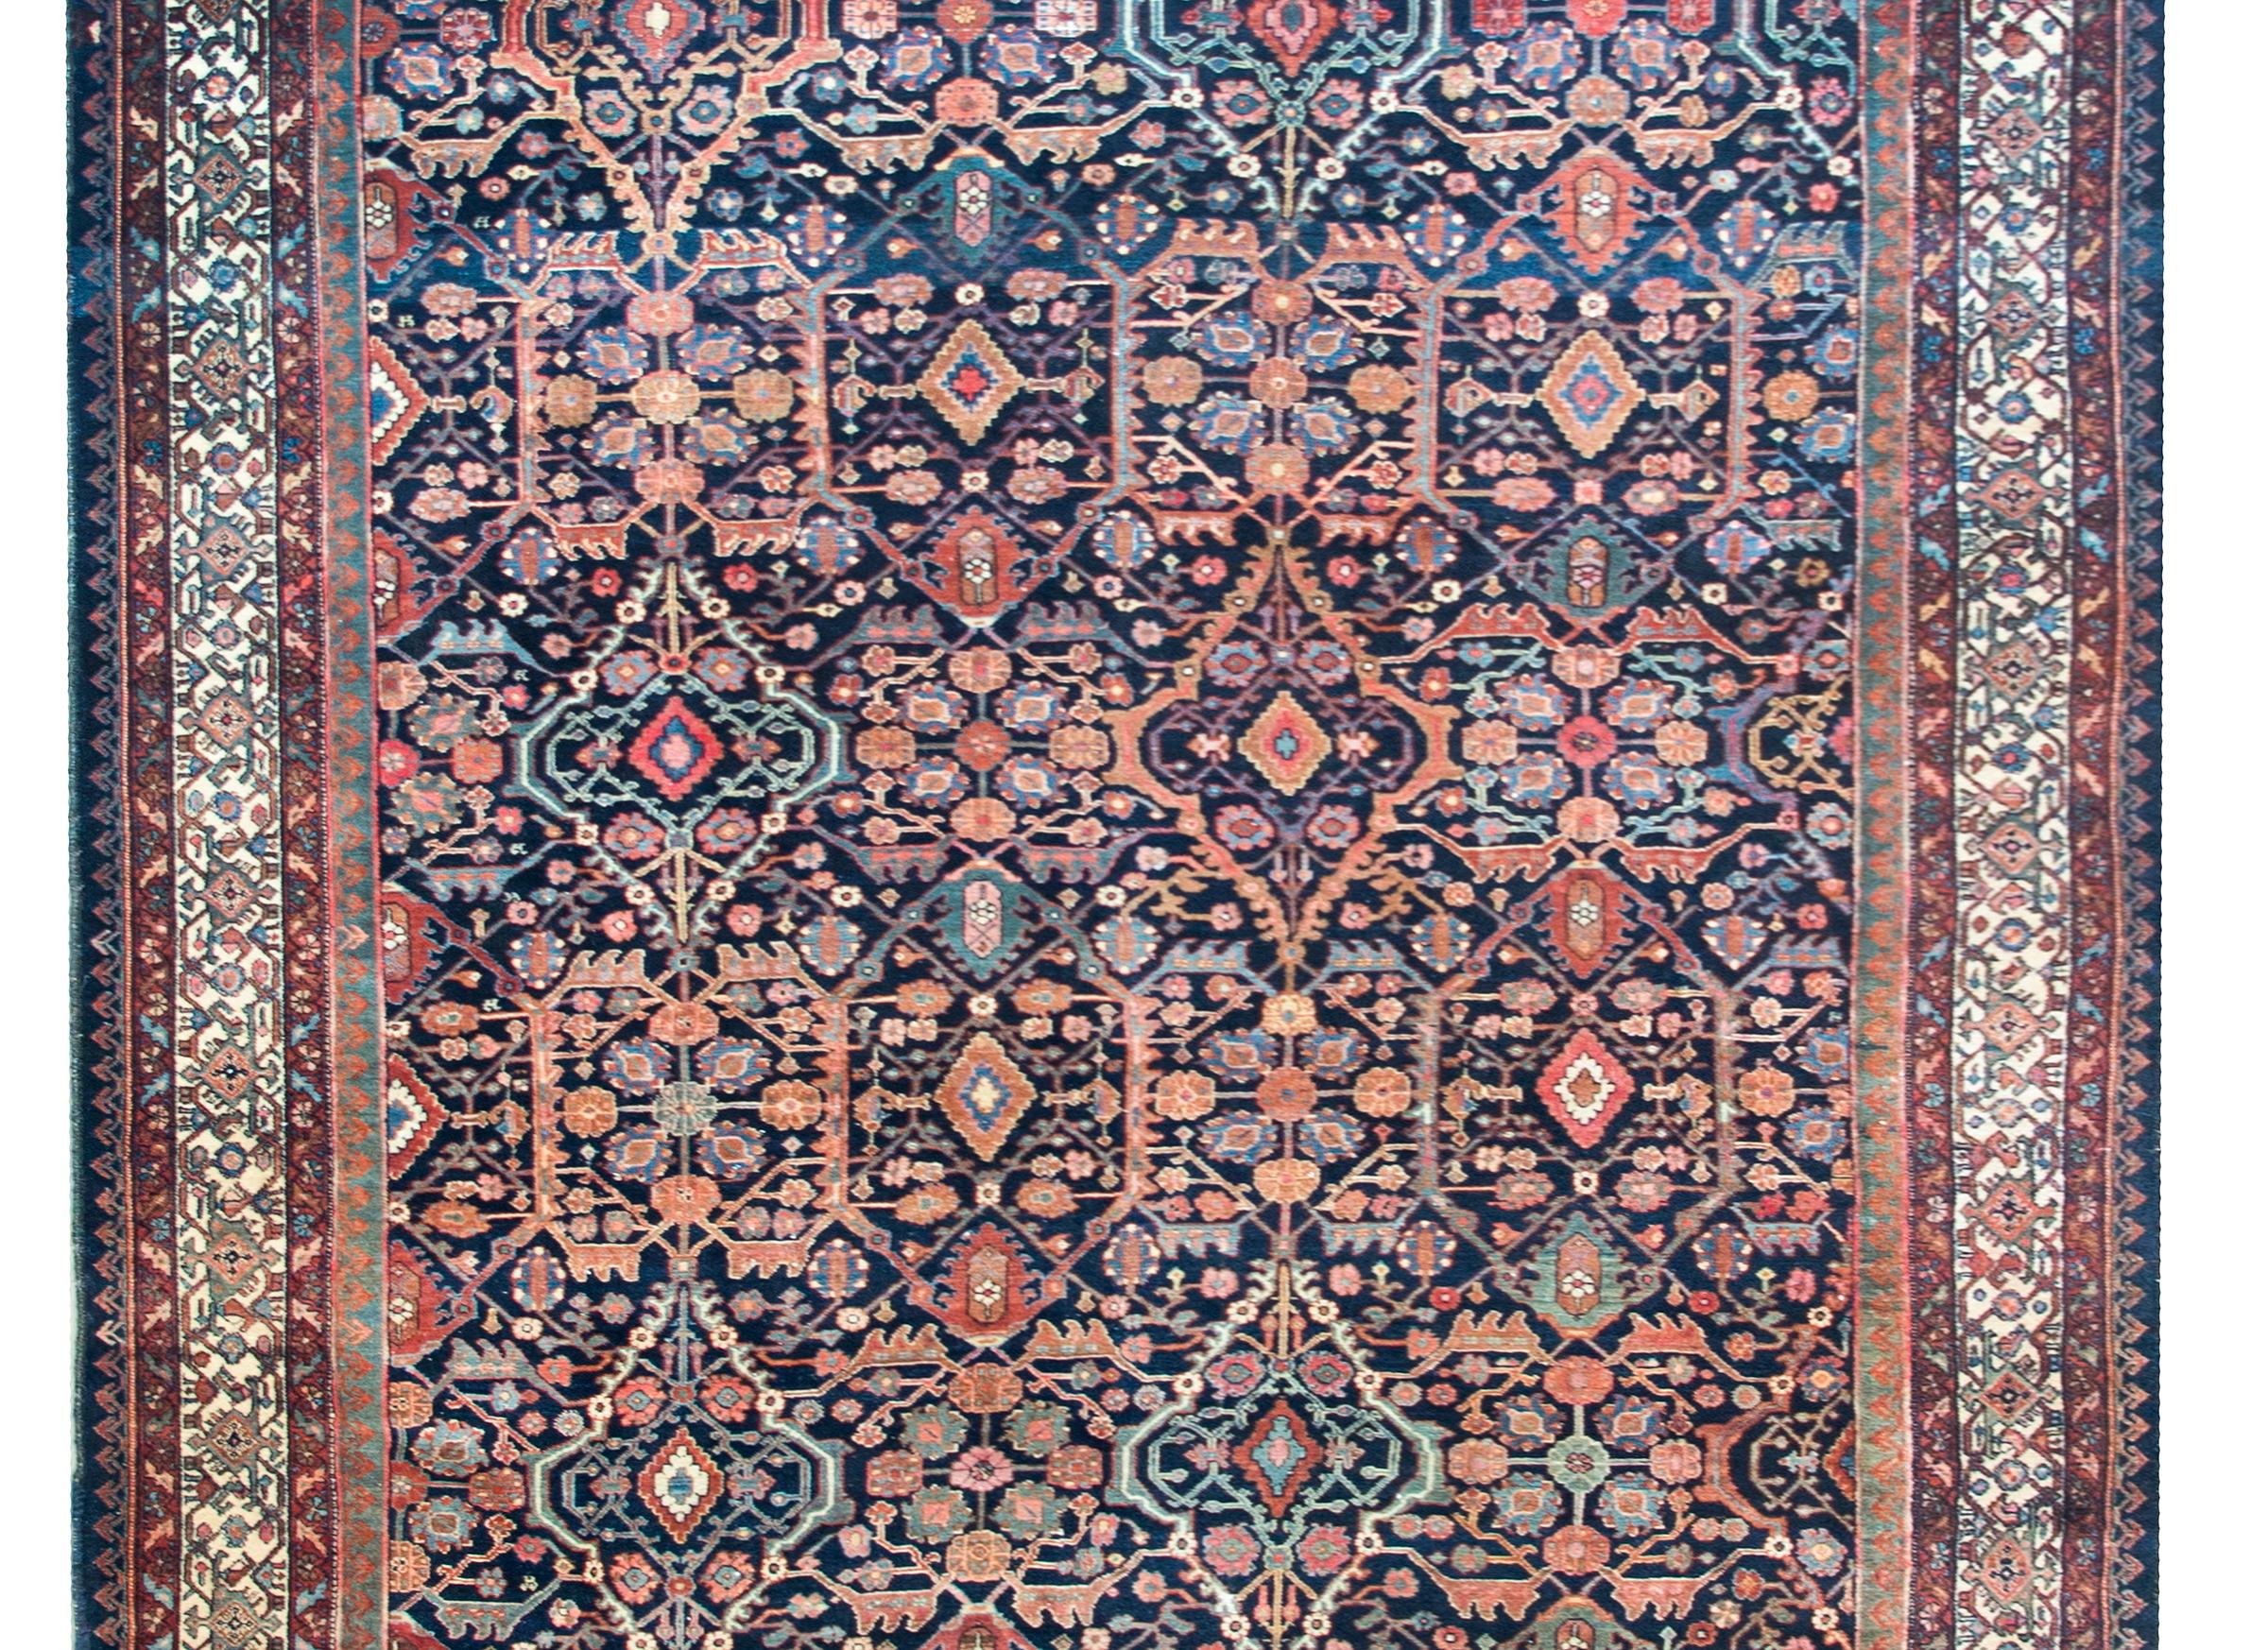 An incredible early 20th century Persian Malayer rug with an all-over lattice floral pattern woven in myriad colors including crimson, green, gold, light and dark indigo, and all set against a dark indigo background.  The border is complex with